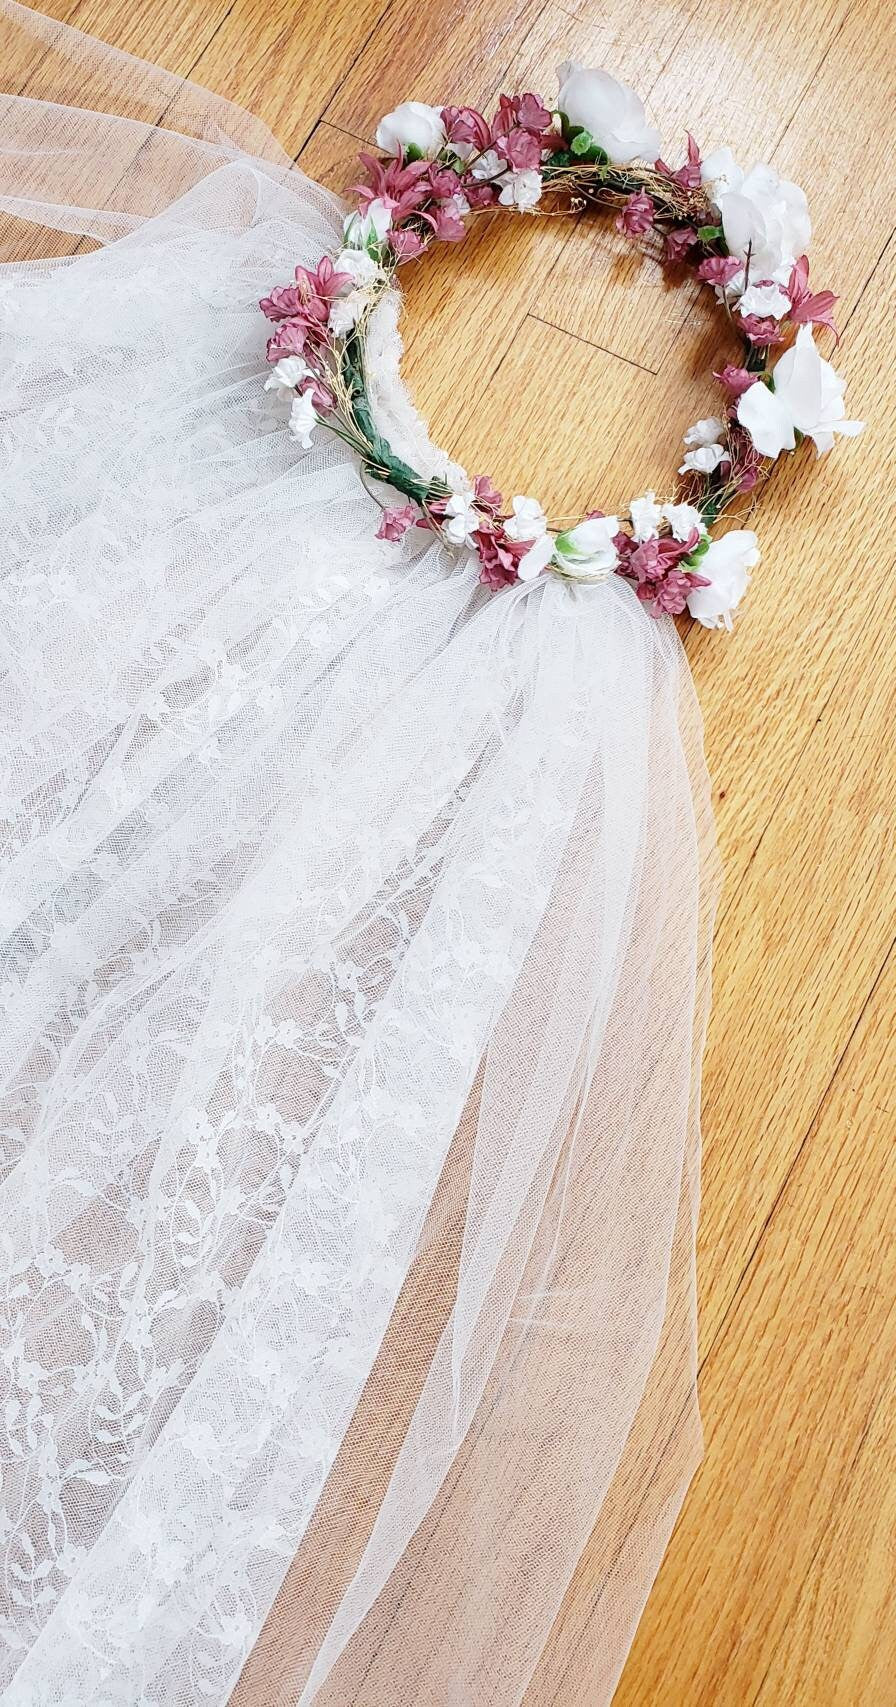 1970s Bridal Wreath and White Lace Veil Headpiece / 70s Boho Fairy Woodlands Floral Crown with White Tulle / Loula